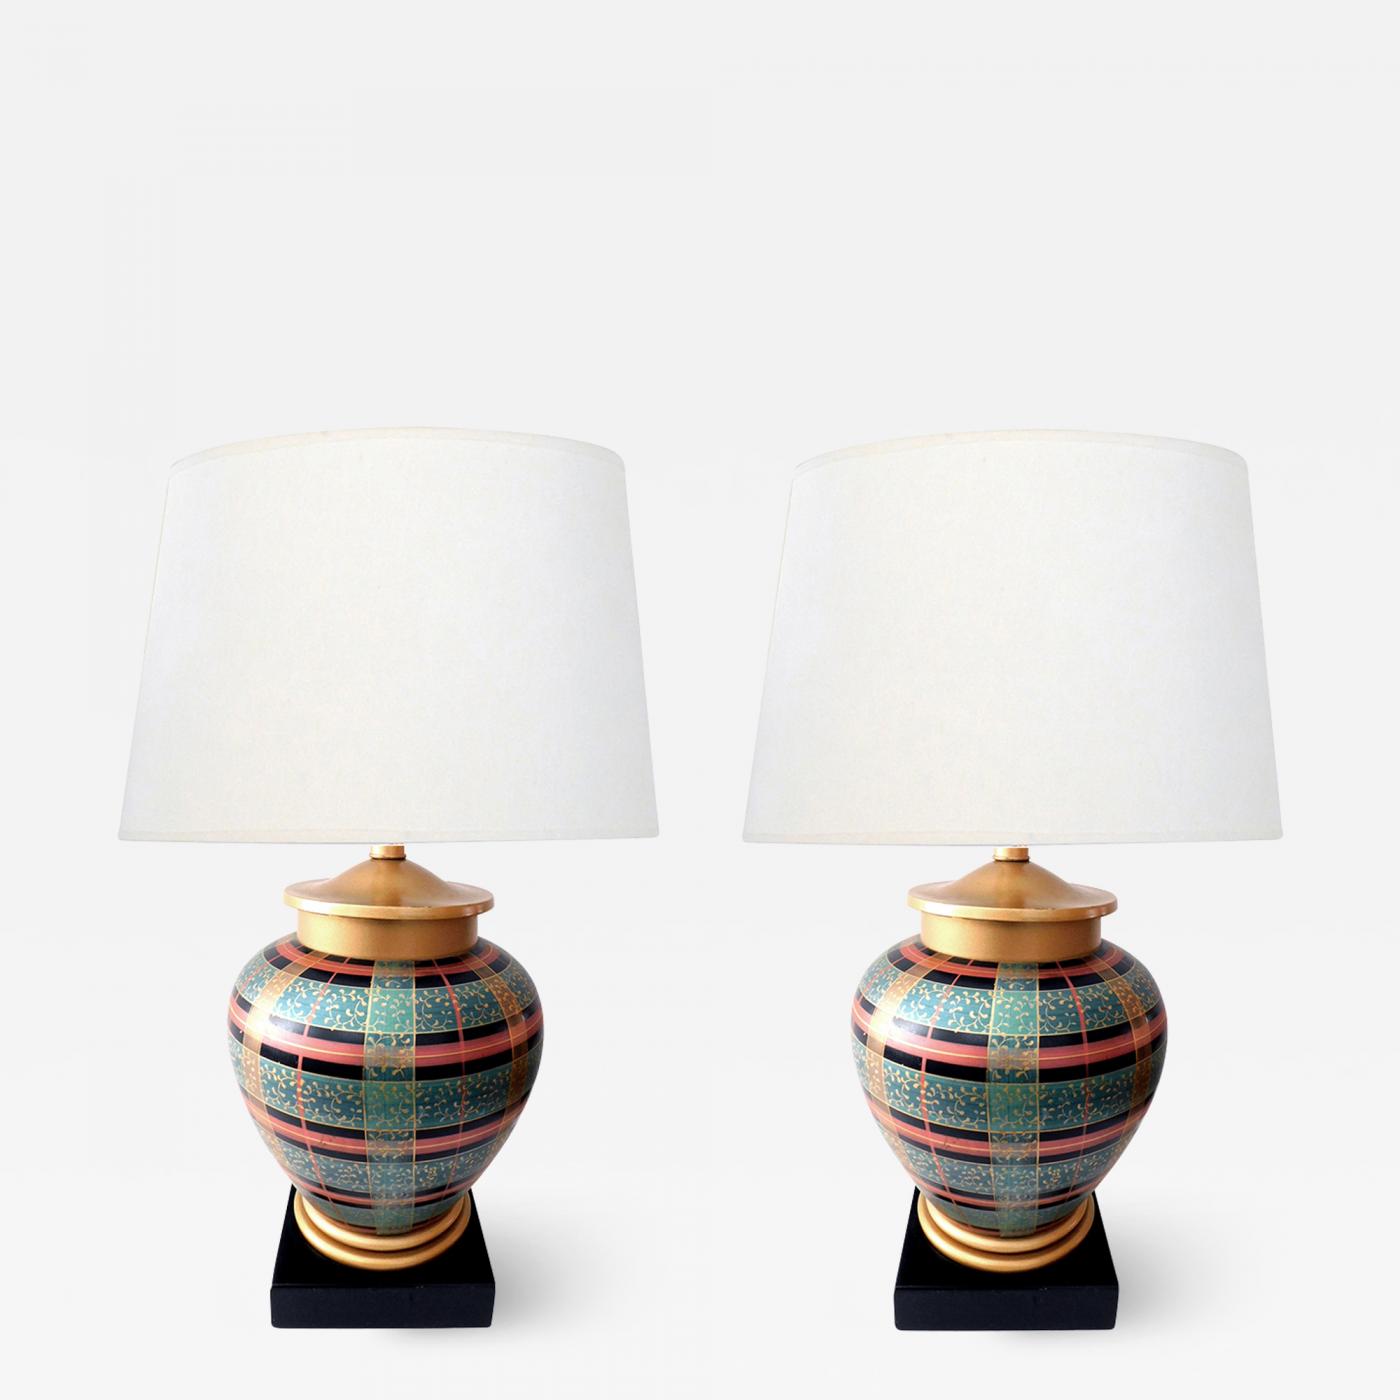 Frederick Cooper Lamp Co. - Pair of Frederick Cooper Ovoid-form Lamps with  Plaid Decoration